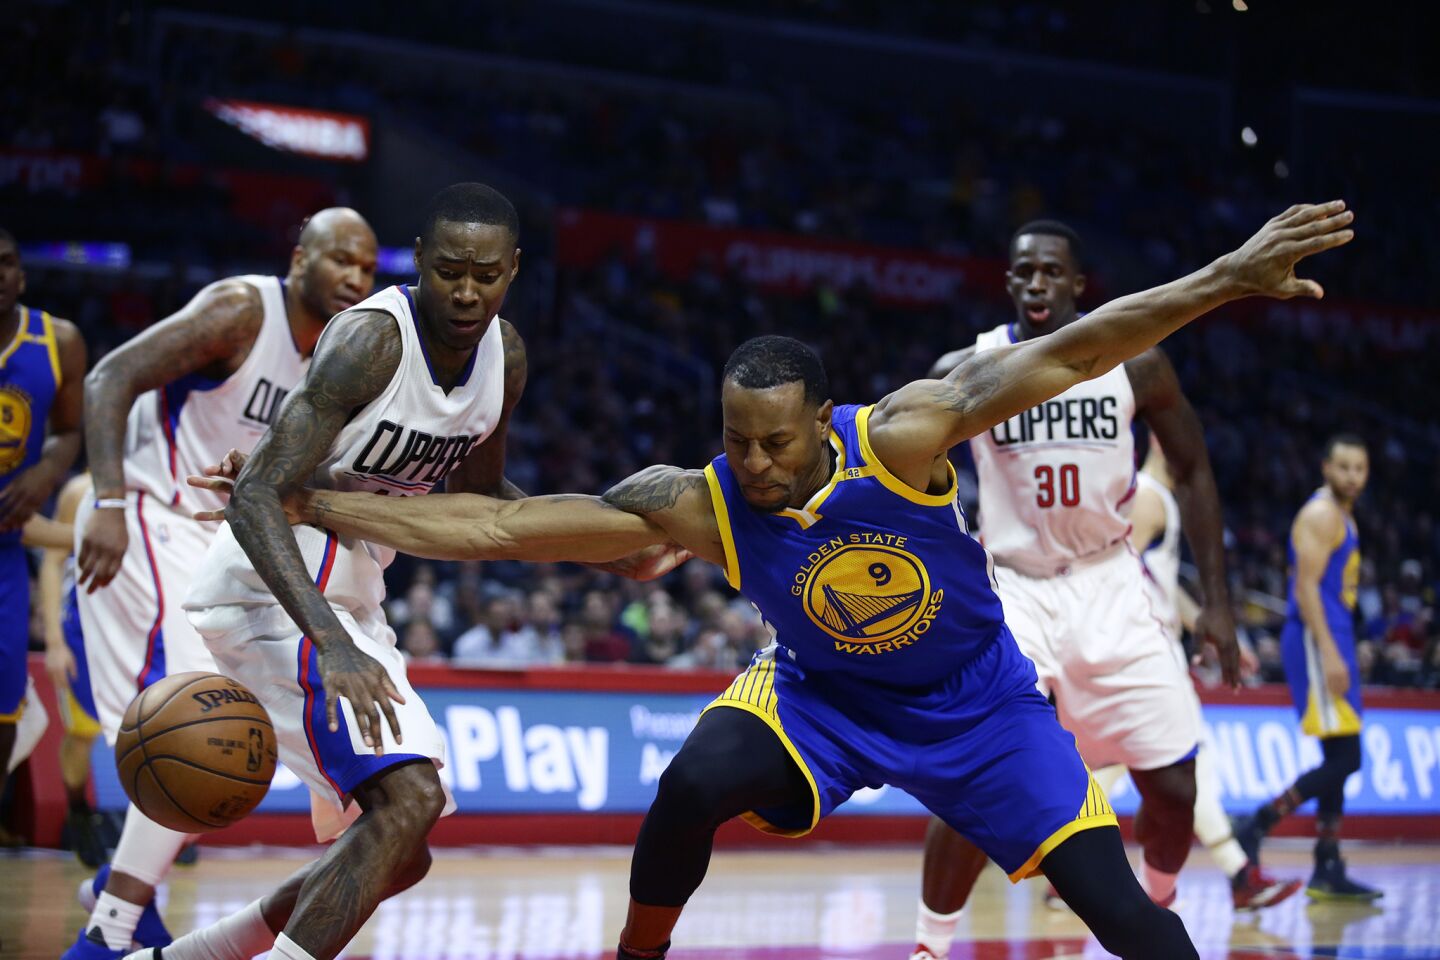 Clippers guard Jamal Crawford knocks the ball from Warriors guard Andre Iguodala during second-half play.